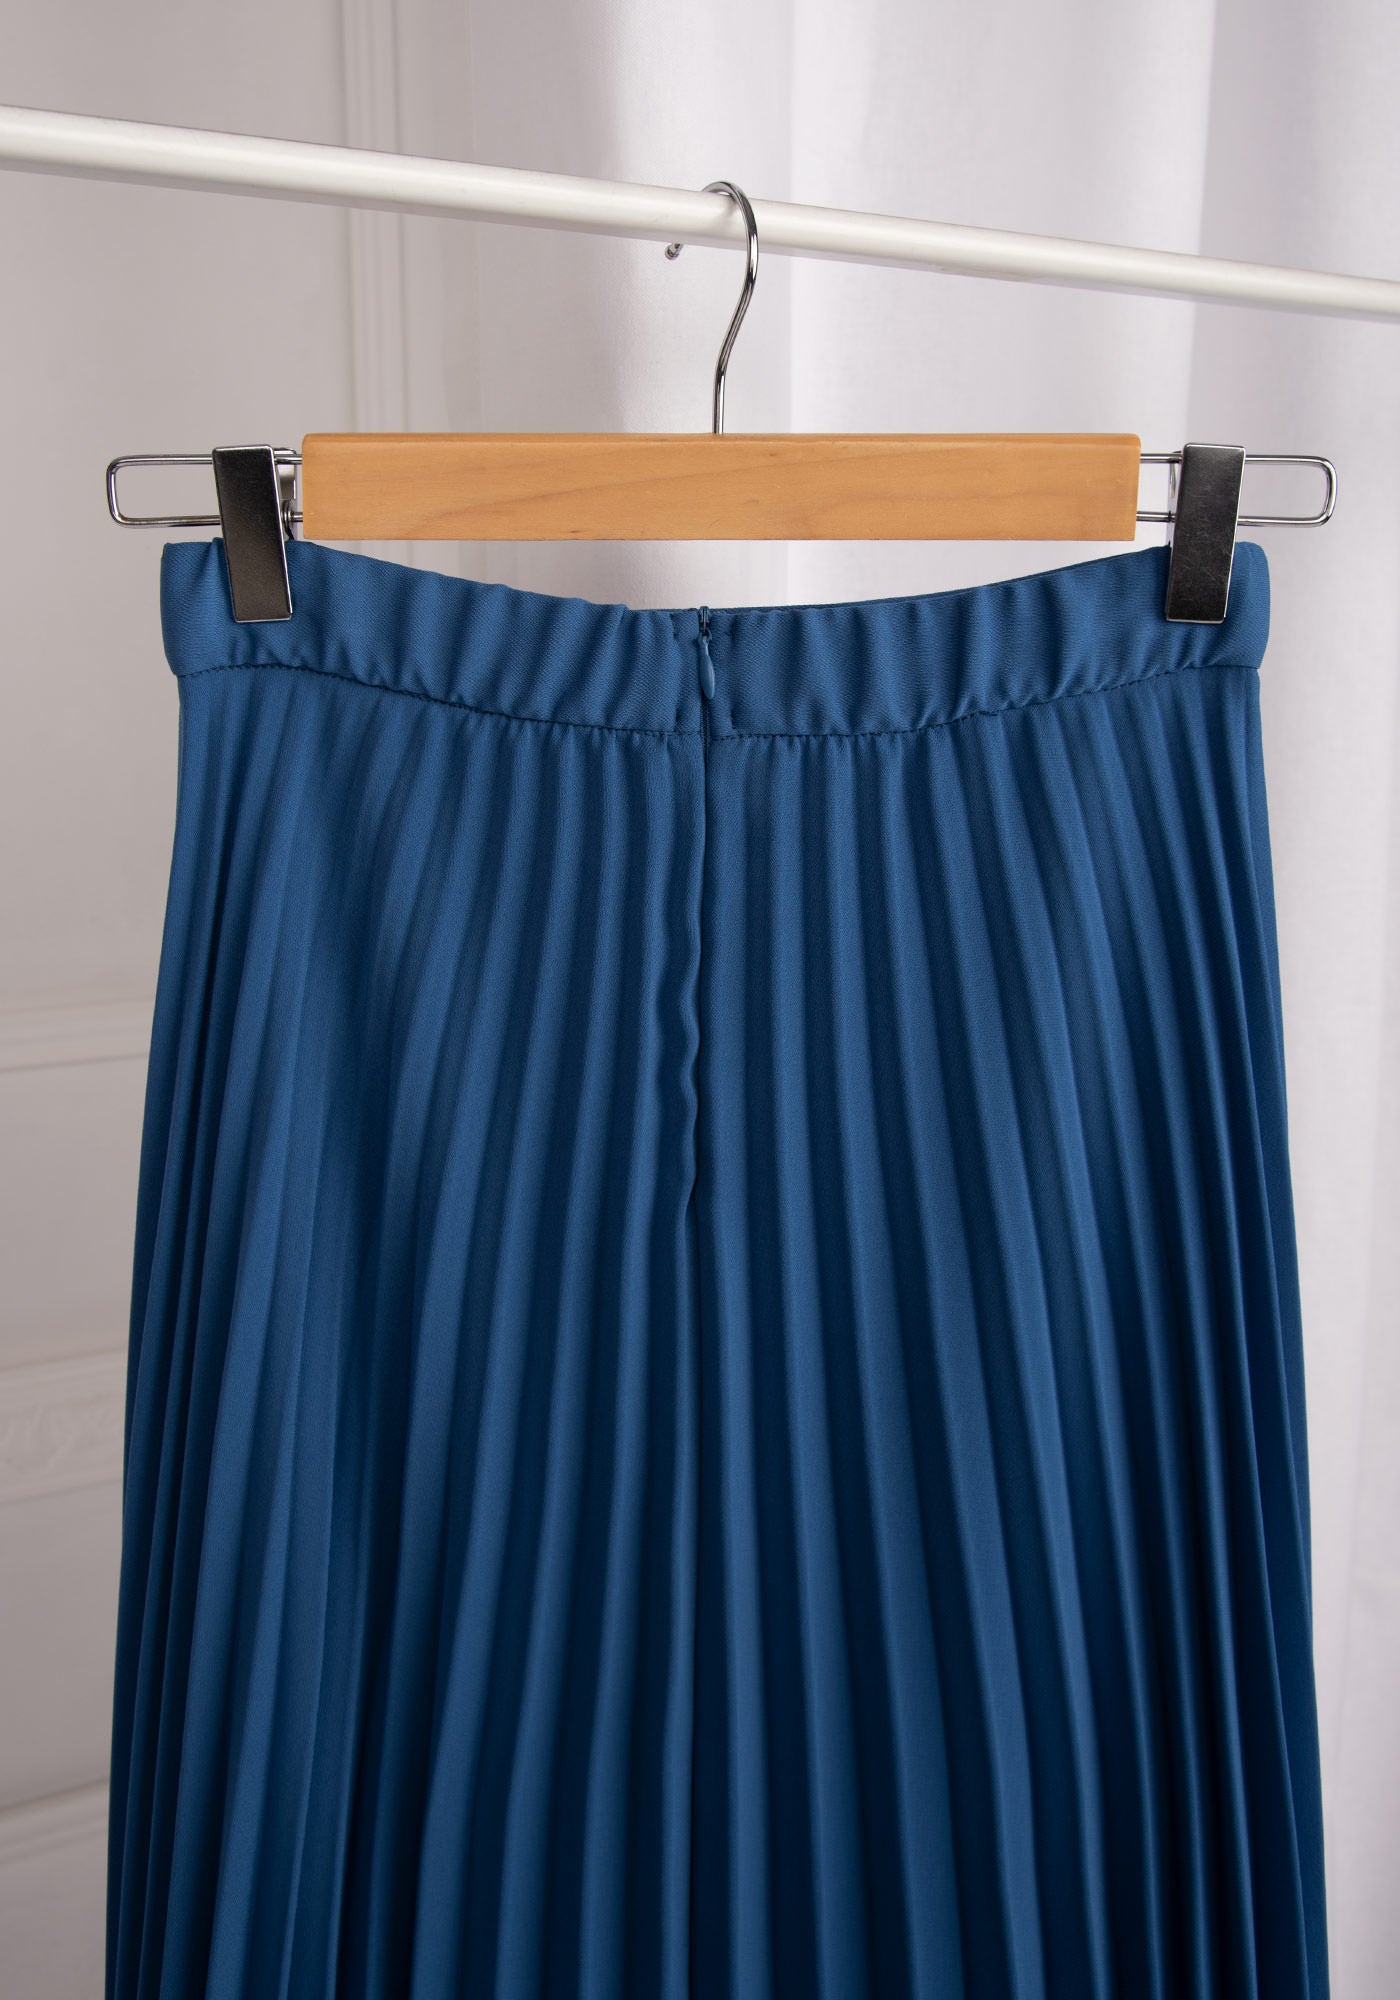 High Waisted Midi Skirt with Soleil pleats in Blue